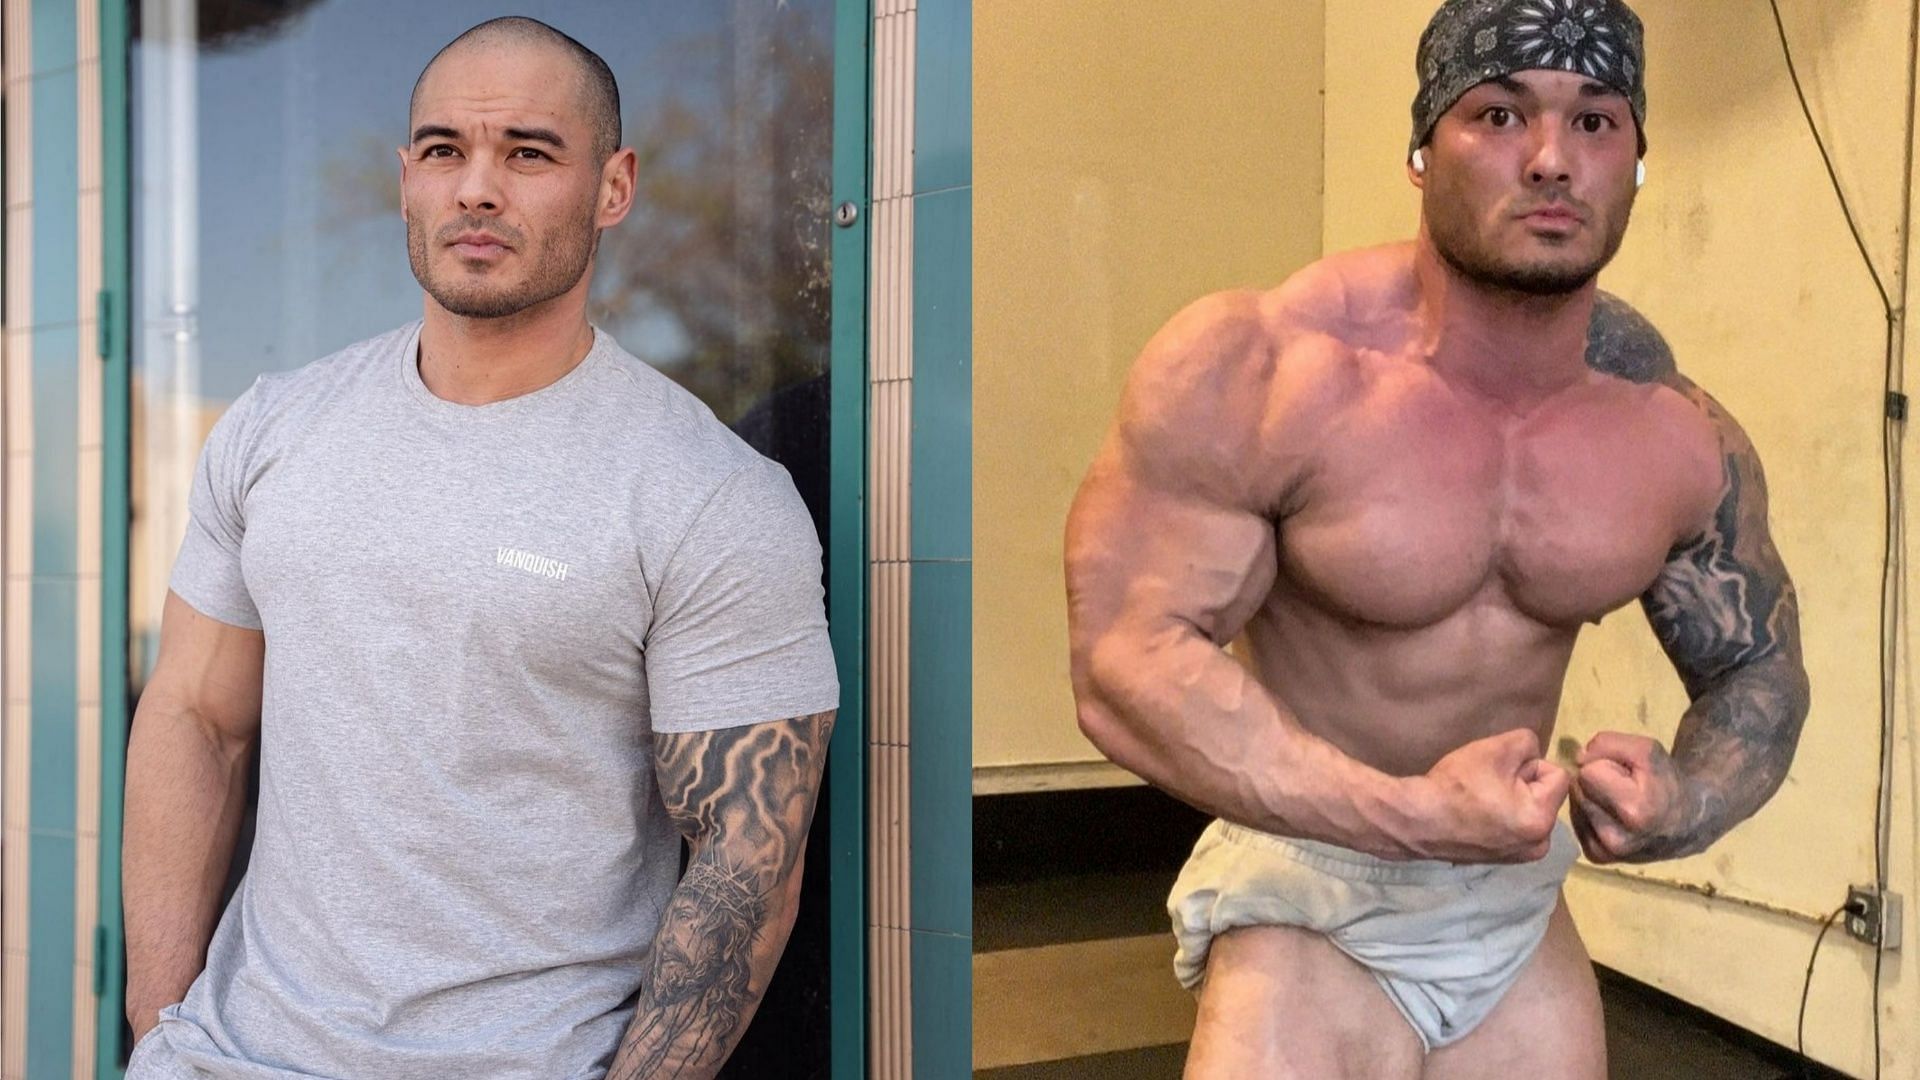 "Only six months away from comeback" Jeremy Buendia announces